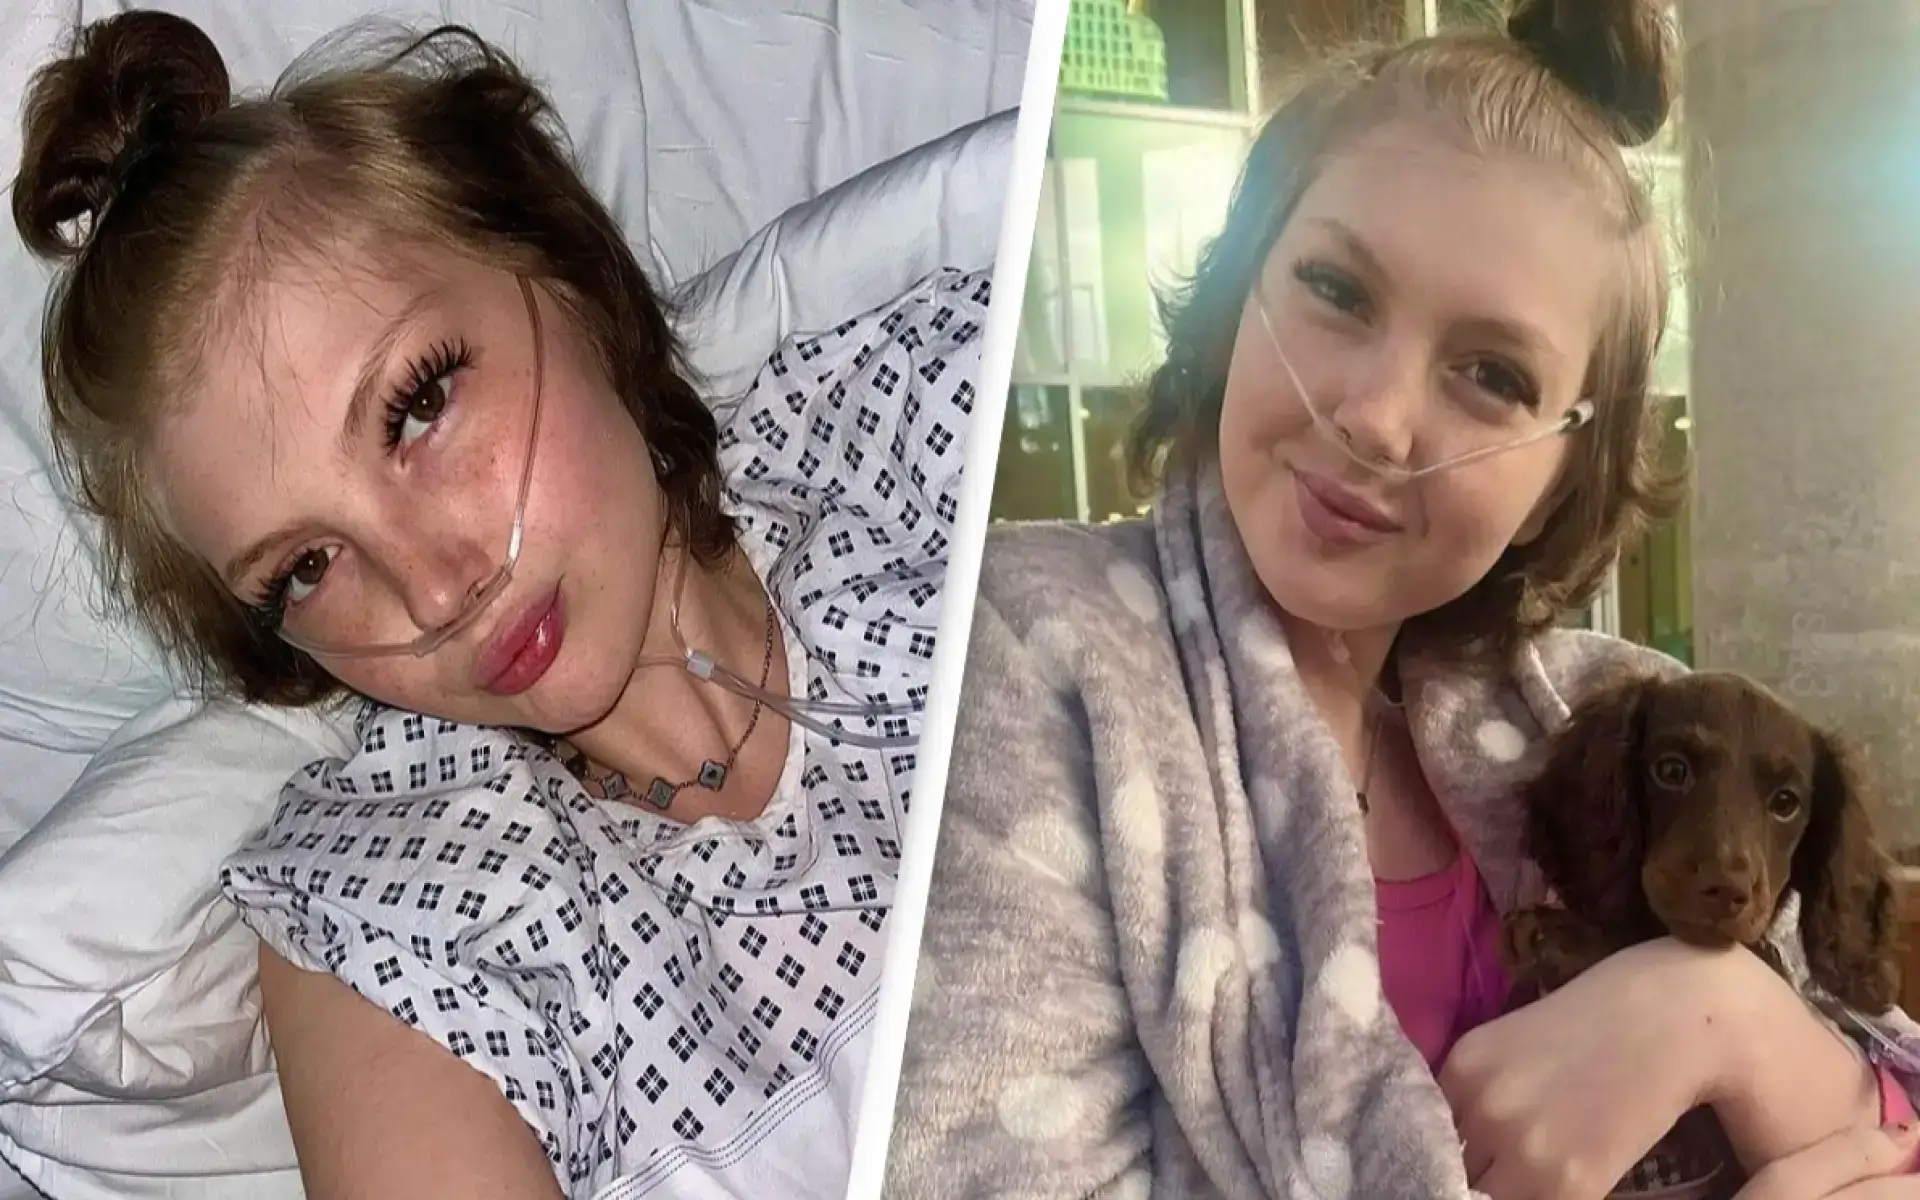 Leah Smith Dies at the age of 22 after Battle with Bone Cancer